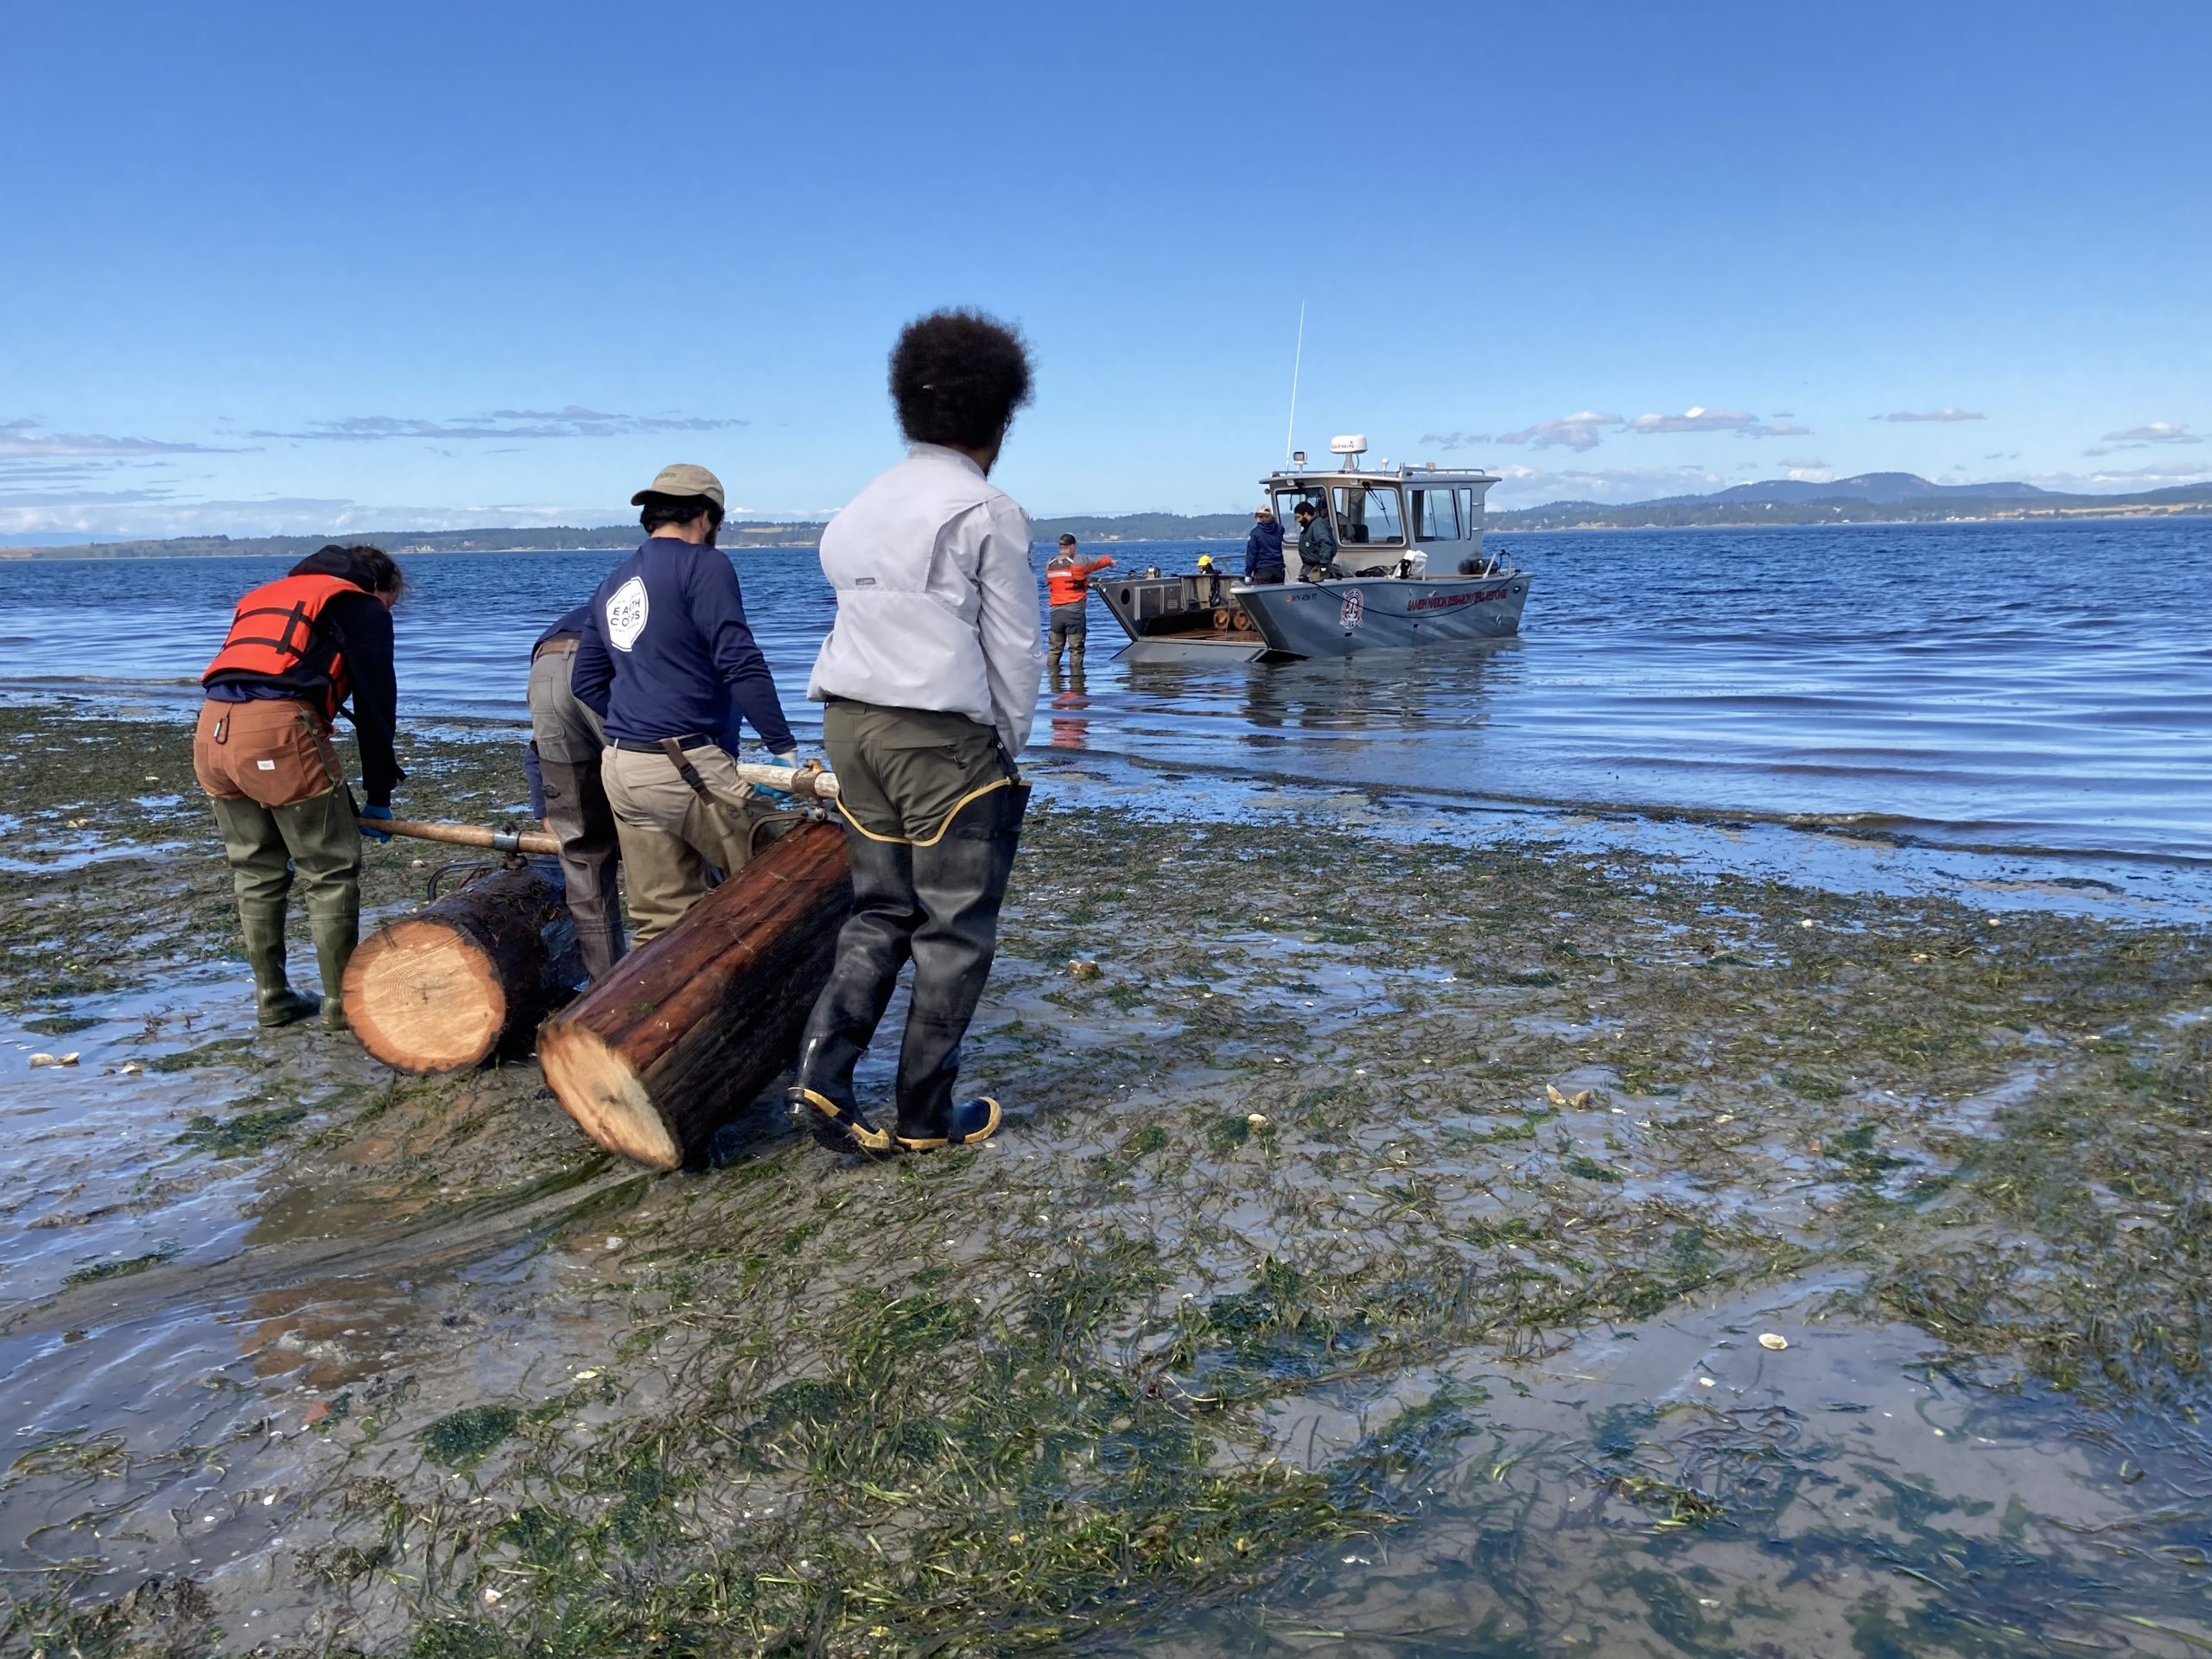 Corps Members wearing waders, dragging logs to a small boat on the water.